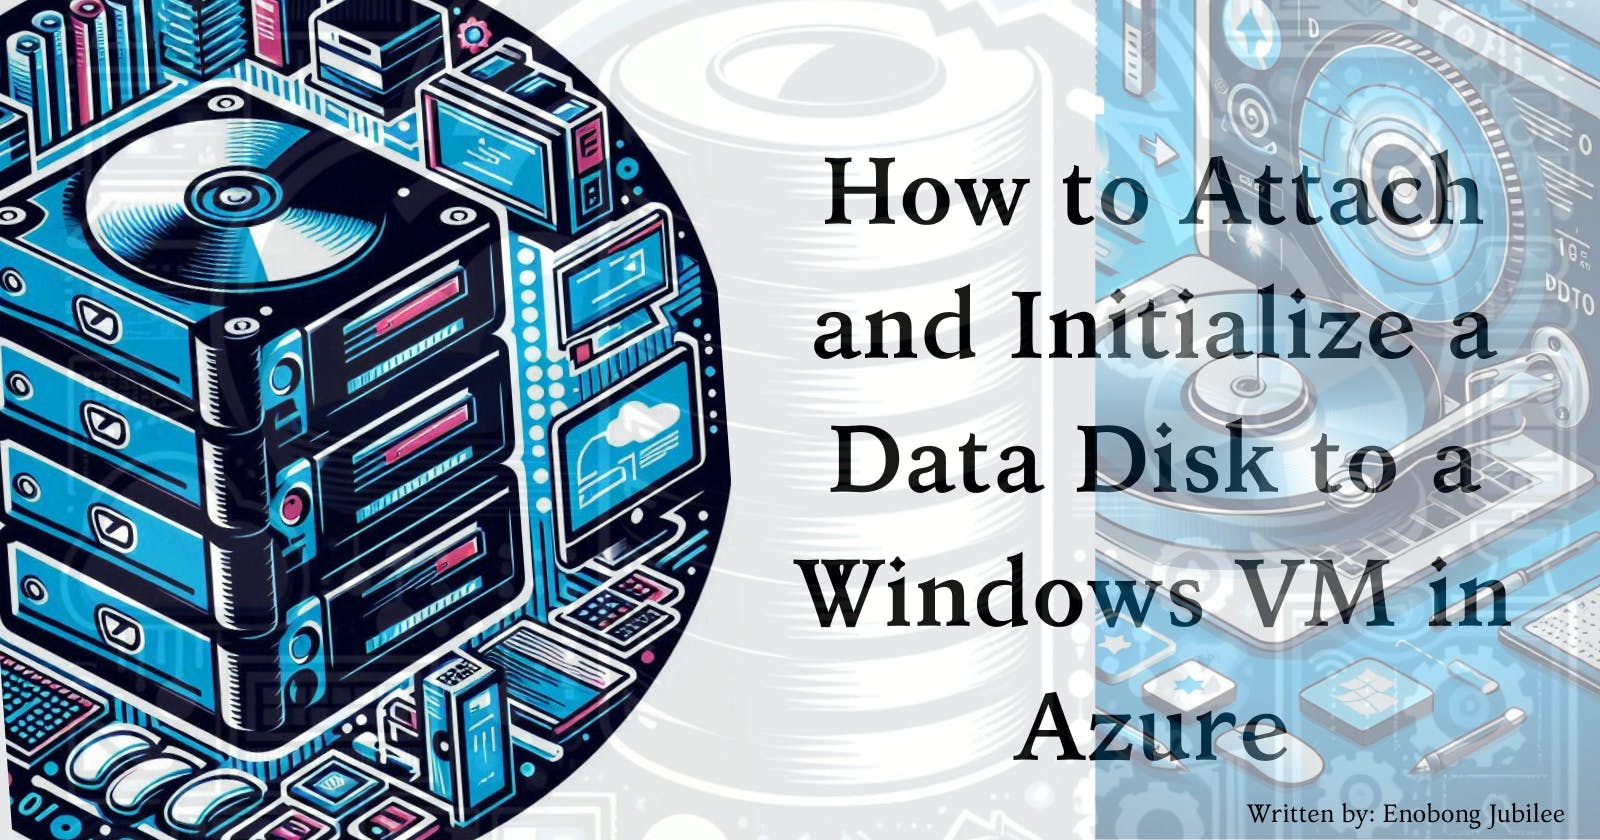 How to Attach and Initialize a Data Disk to a Windows VM in Azure